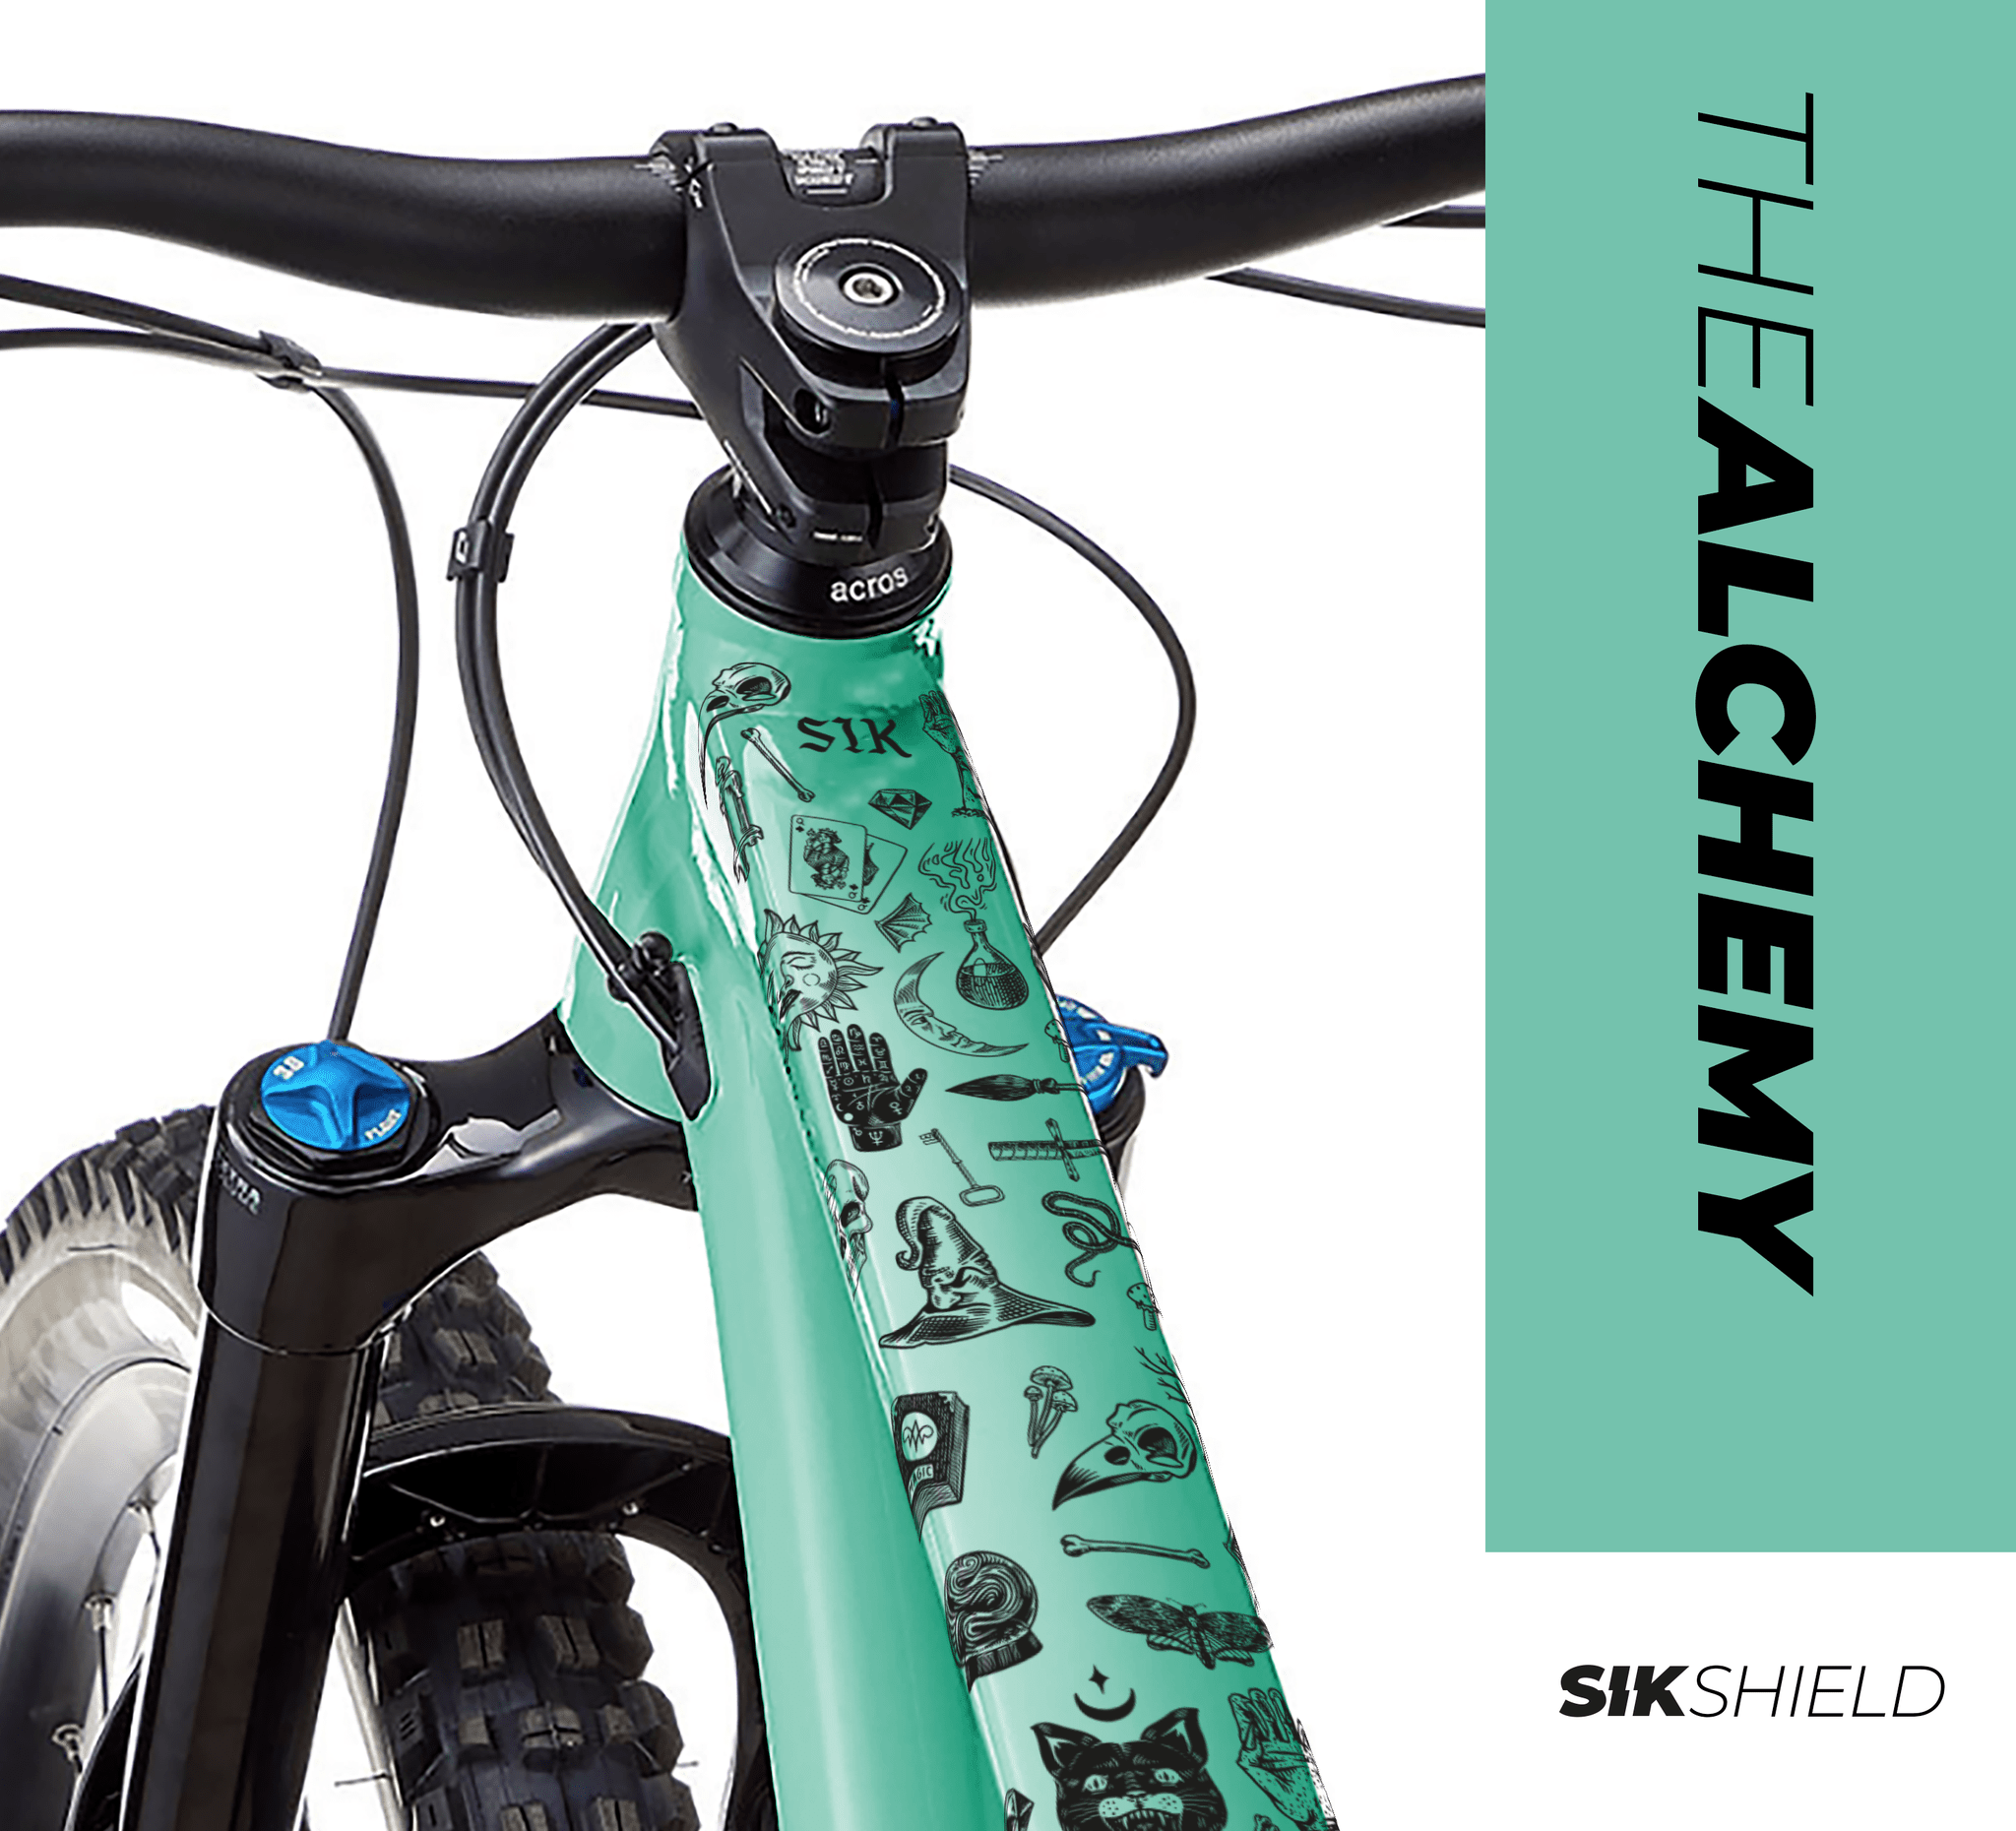 Sikshield mtb frame protection with alchemy images on